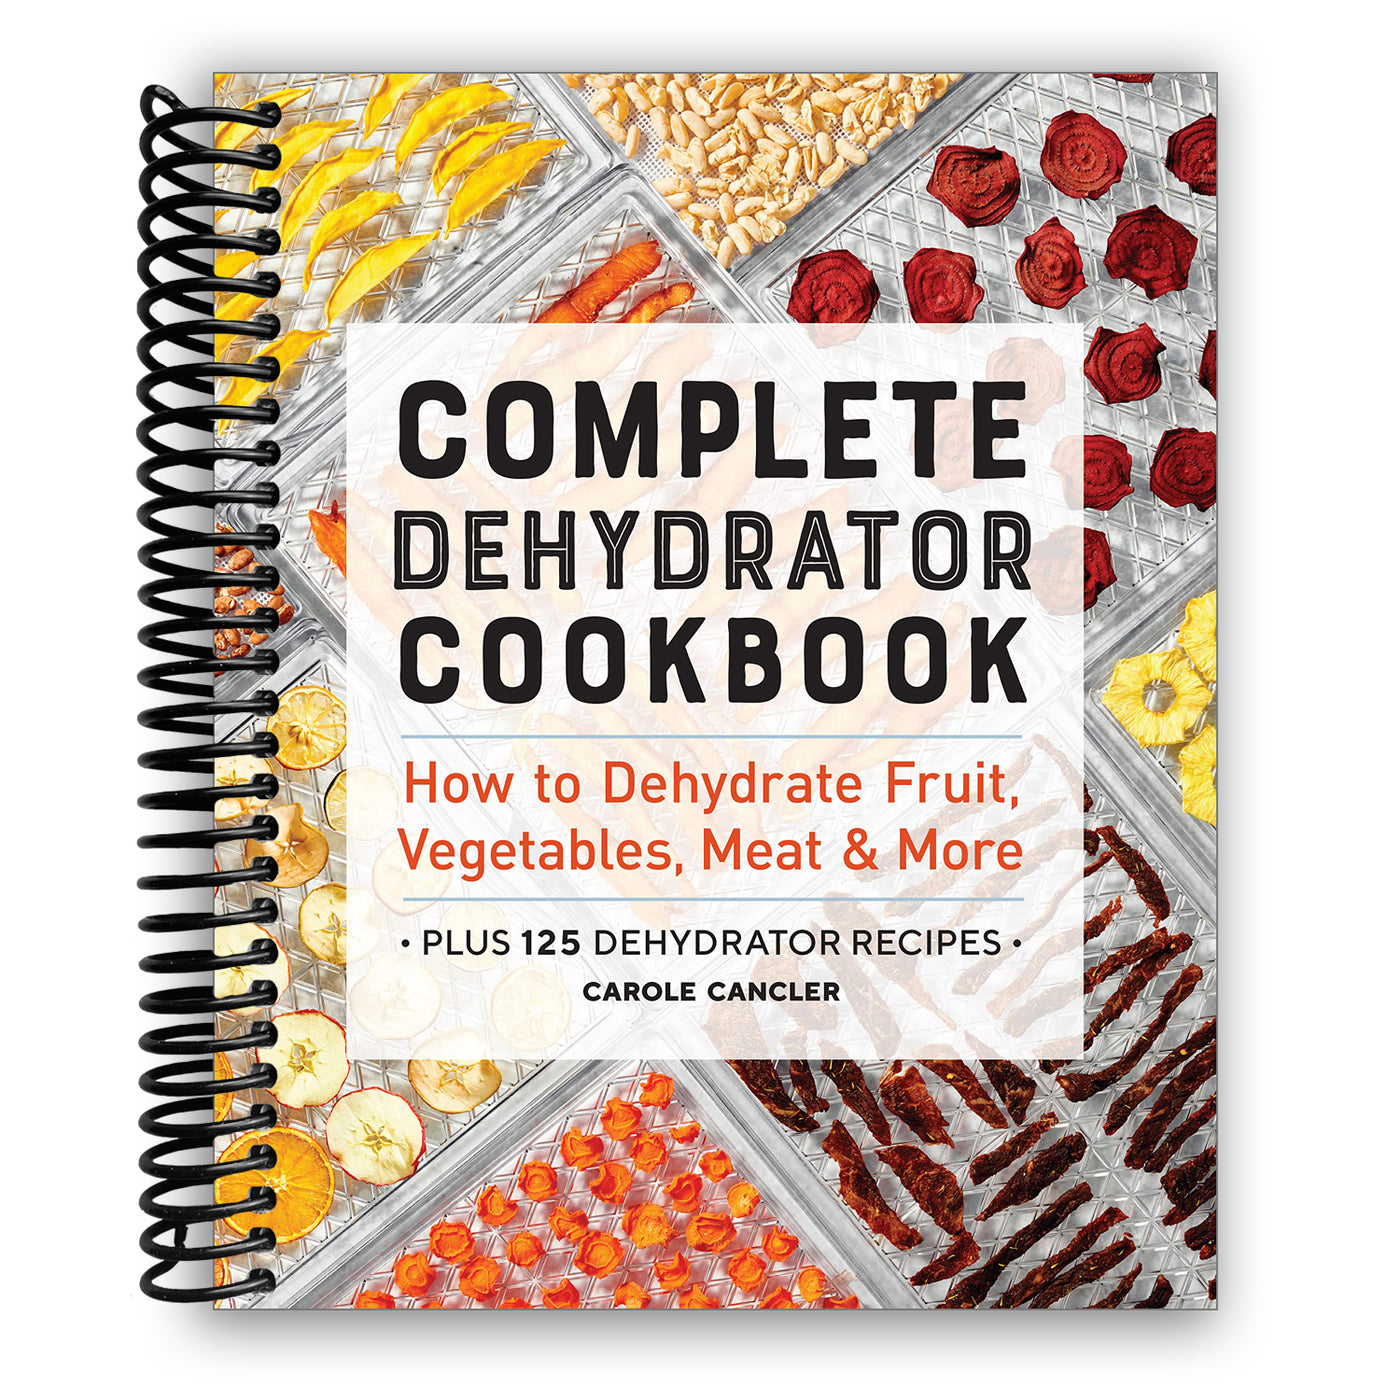 Complete Dehydrator Cookbook: How to Dehydrate Fruit, Vegetables, Meat & More [Book]